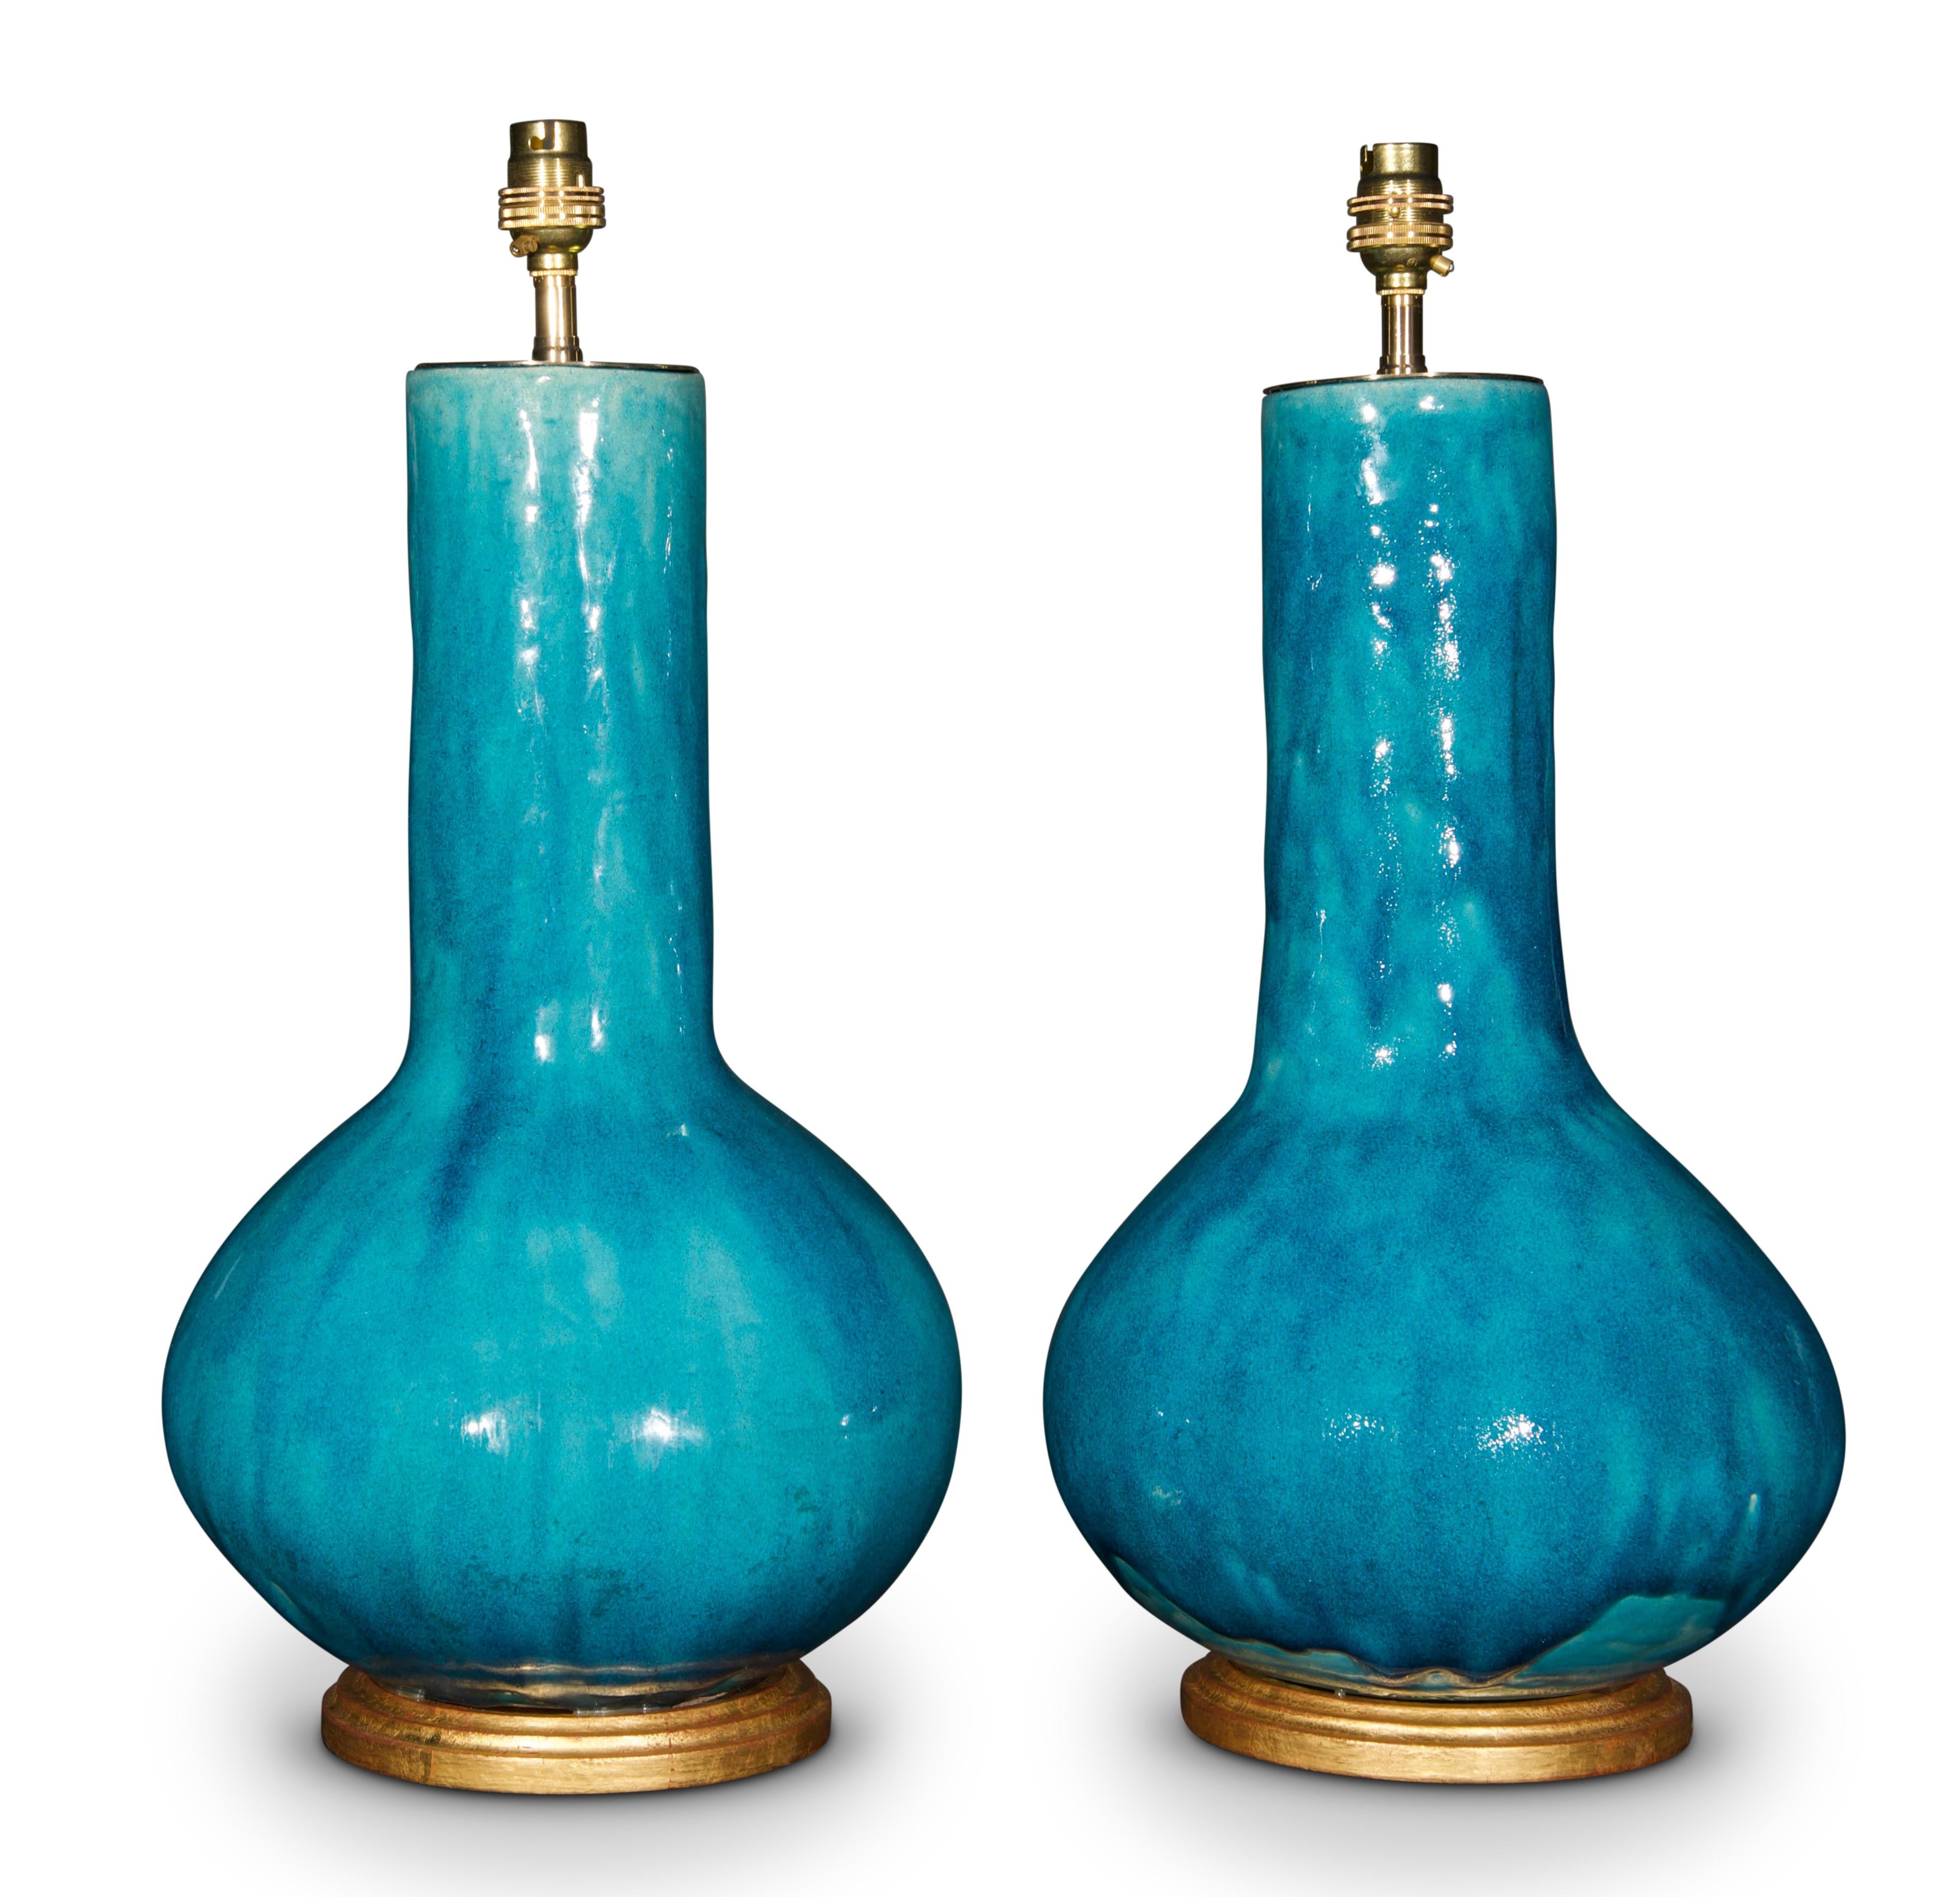 A superb pair of early 20th century French turquoise glazed ceramic vases, now mounted as lamps with hand gilded turned bases.
Fantastic colour to the glaze.

Height of vases: 16 3/4 in (43 cm) including giltwood base, exluding electrical fitment